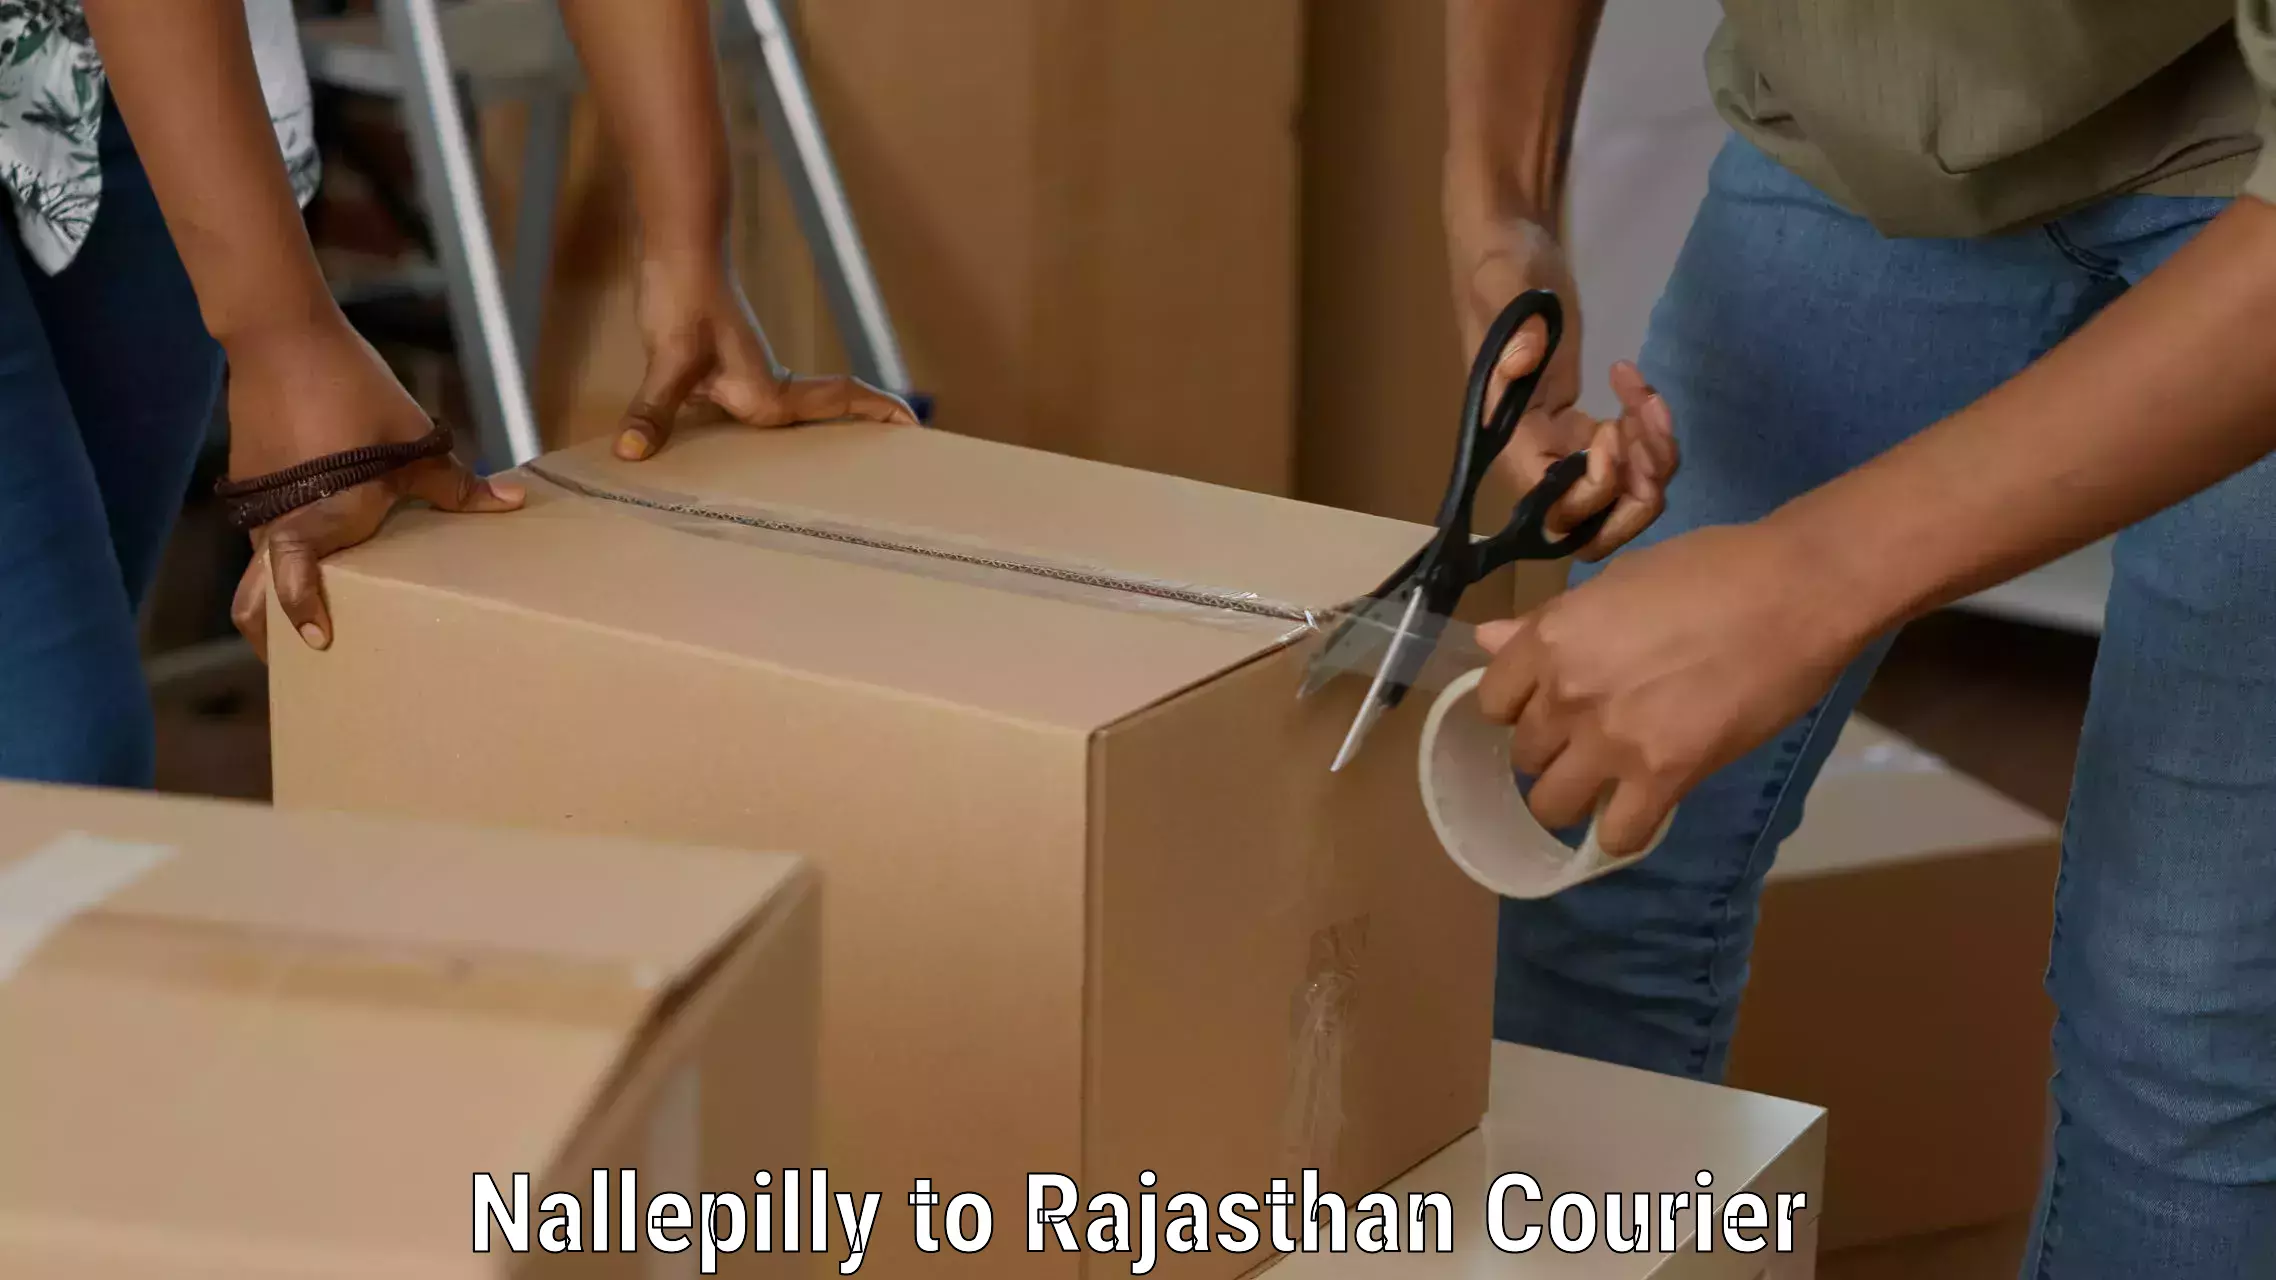 Reliable shipping partners Nallepilly to Bhilwara